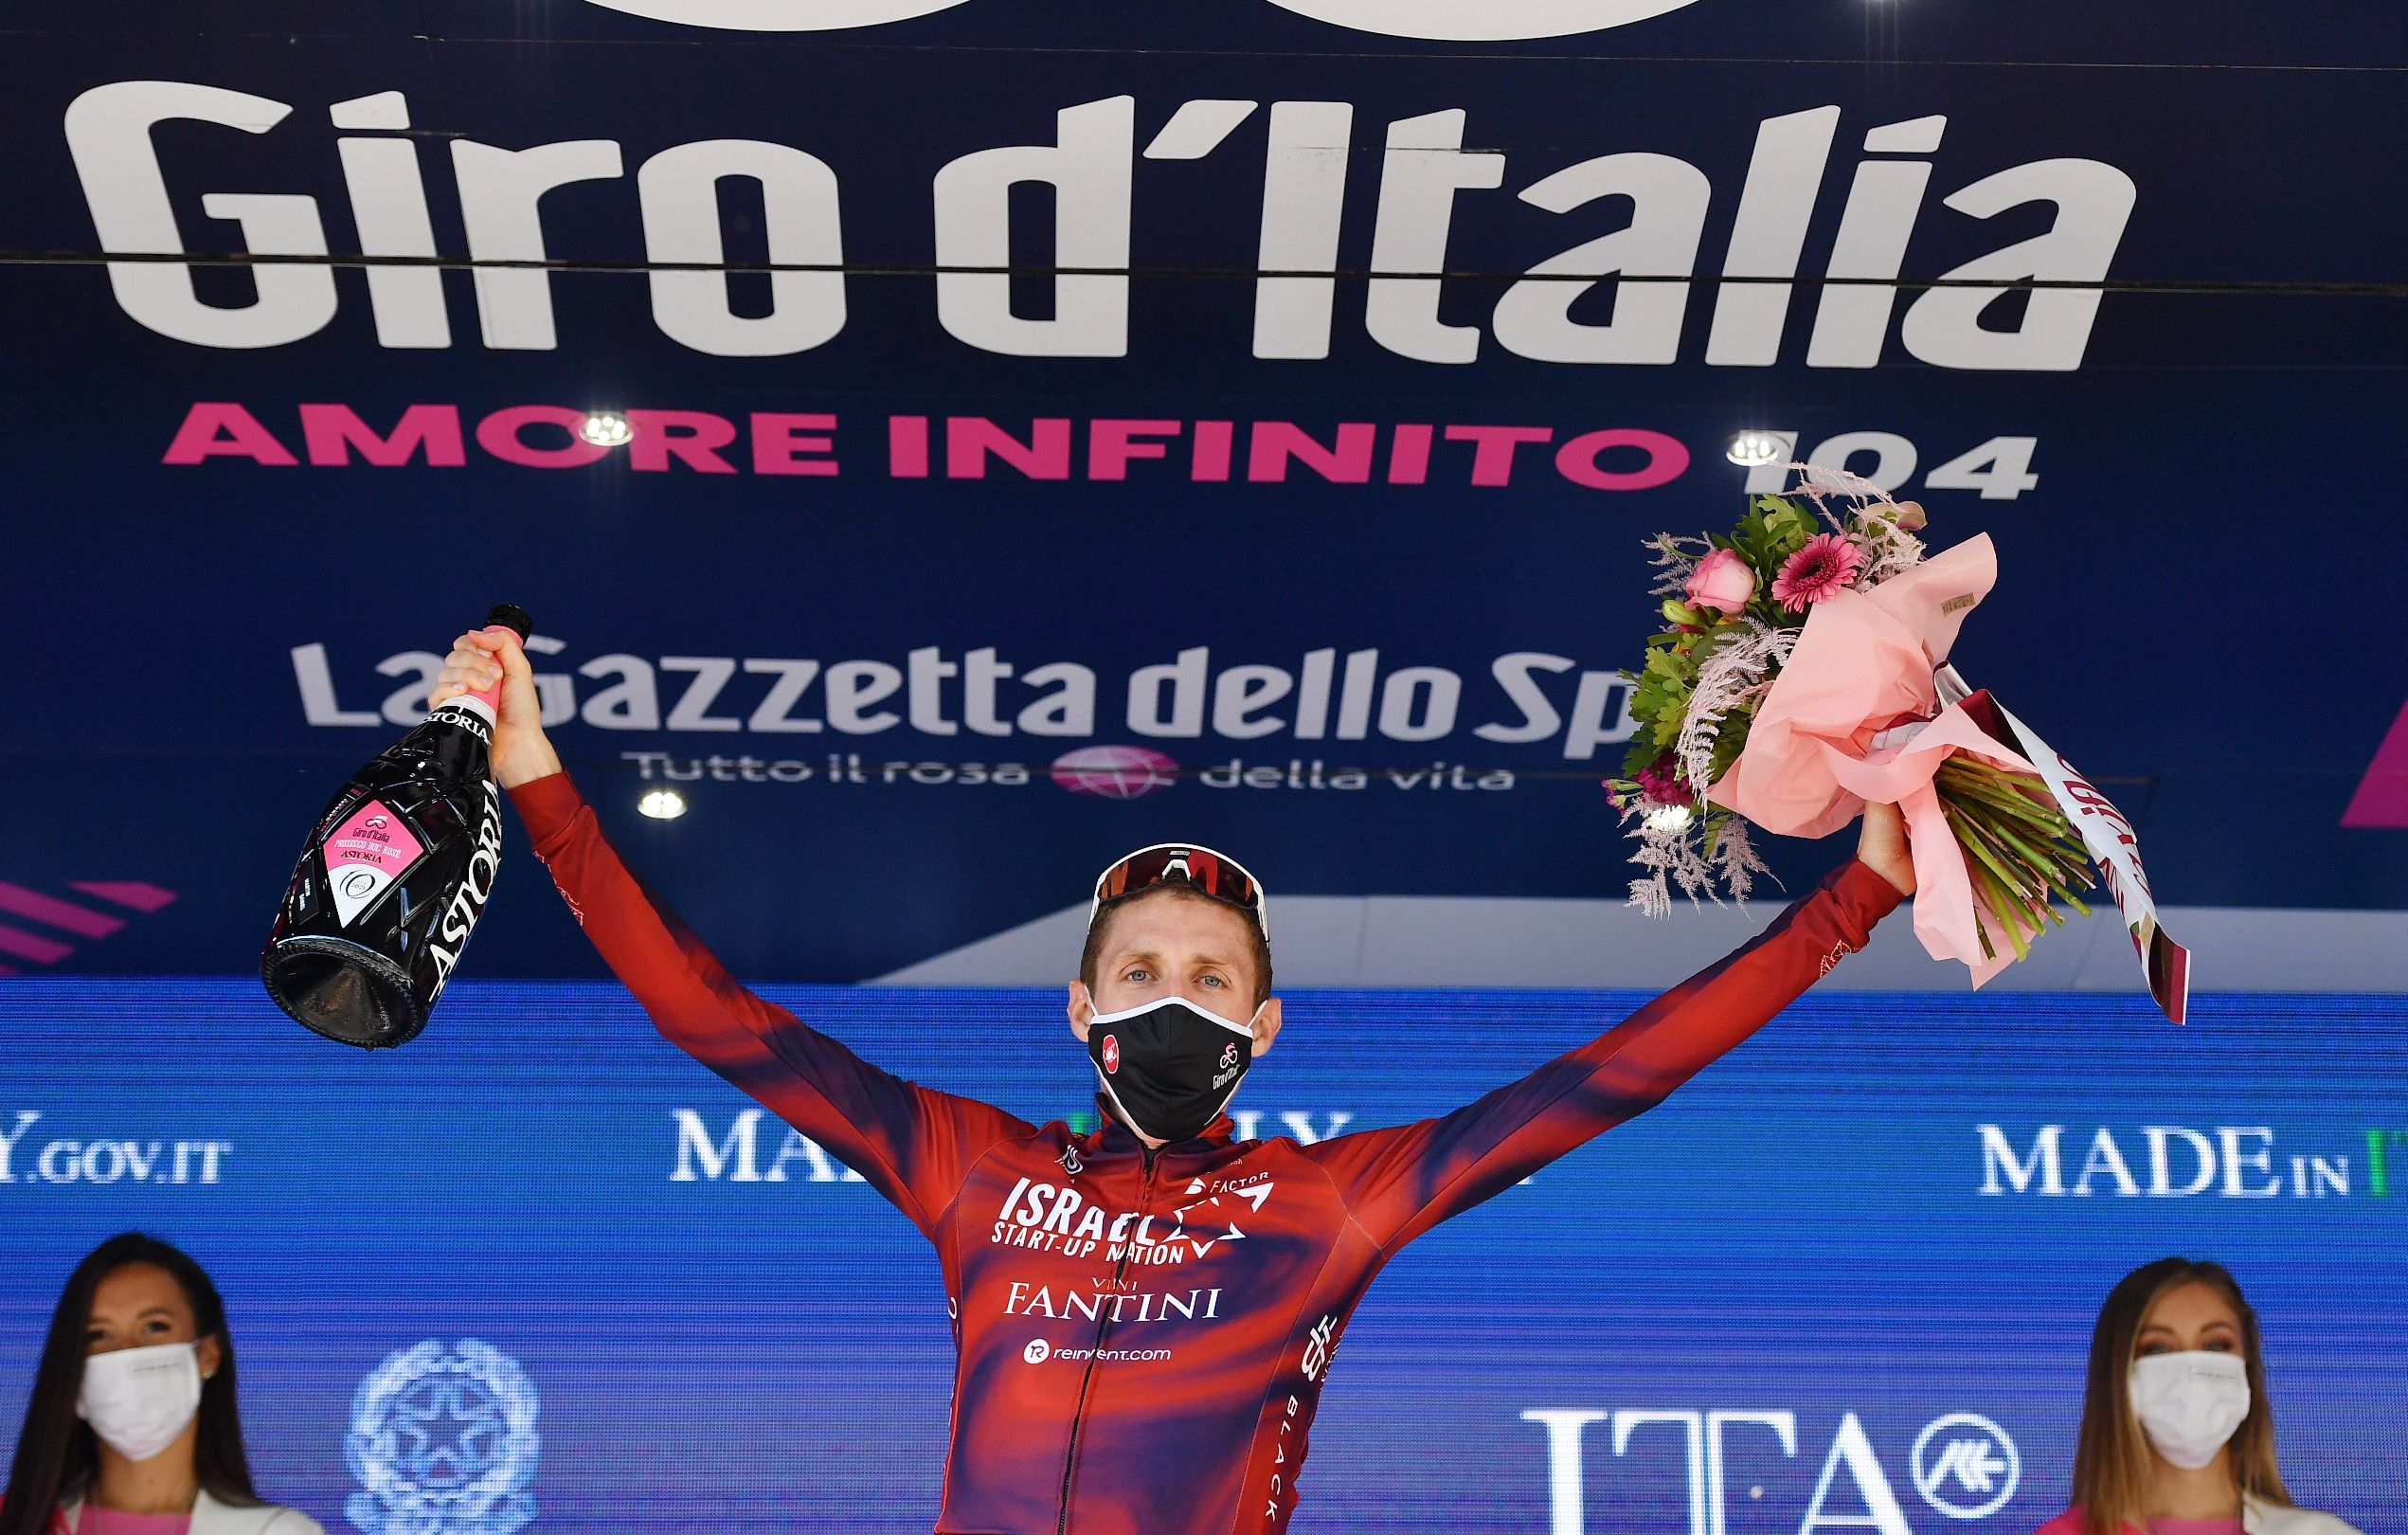 Martin wins Giro stage 17 as Bernal shows first sign of weakness Reuters